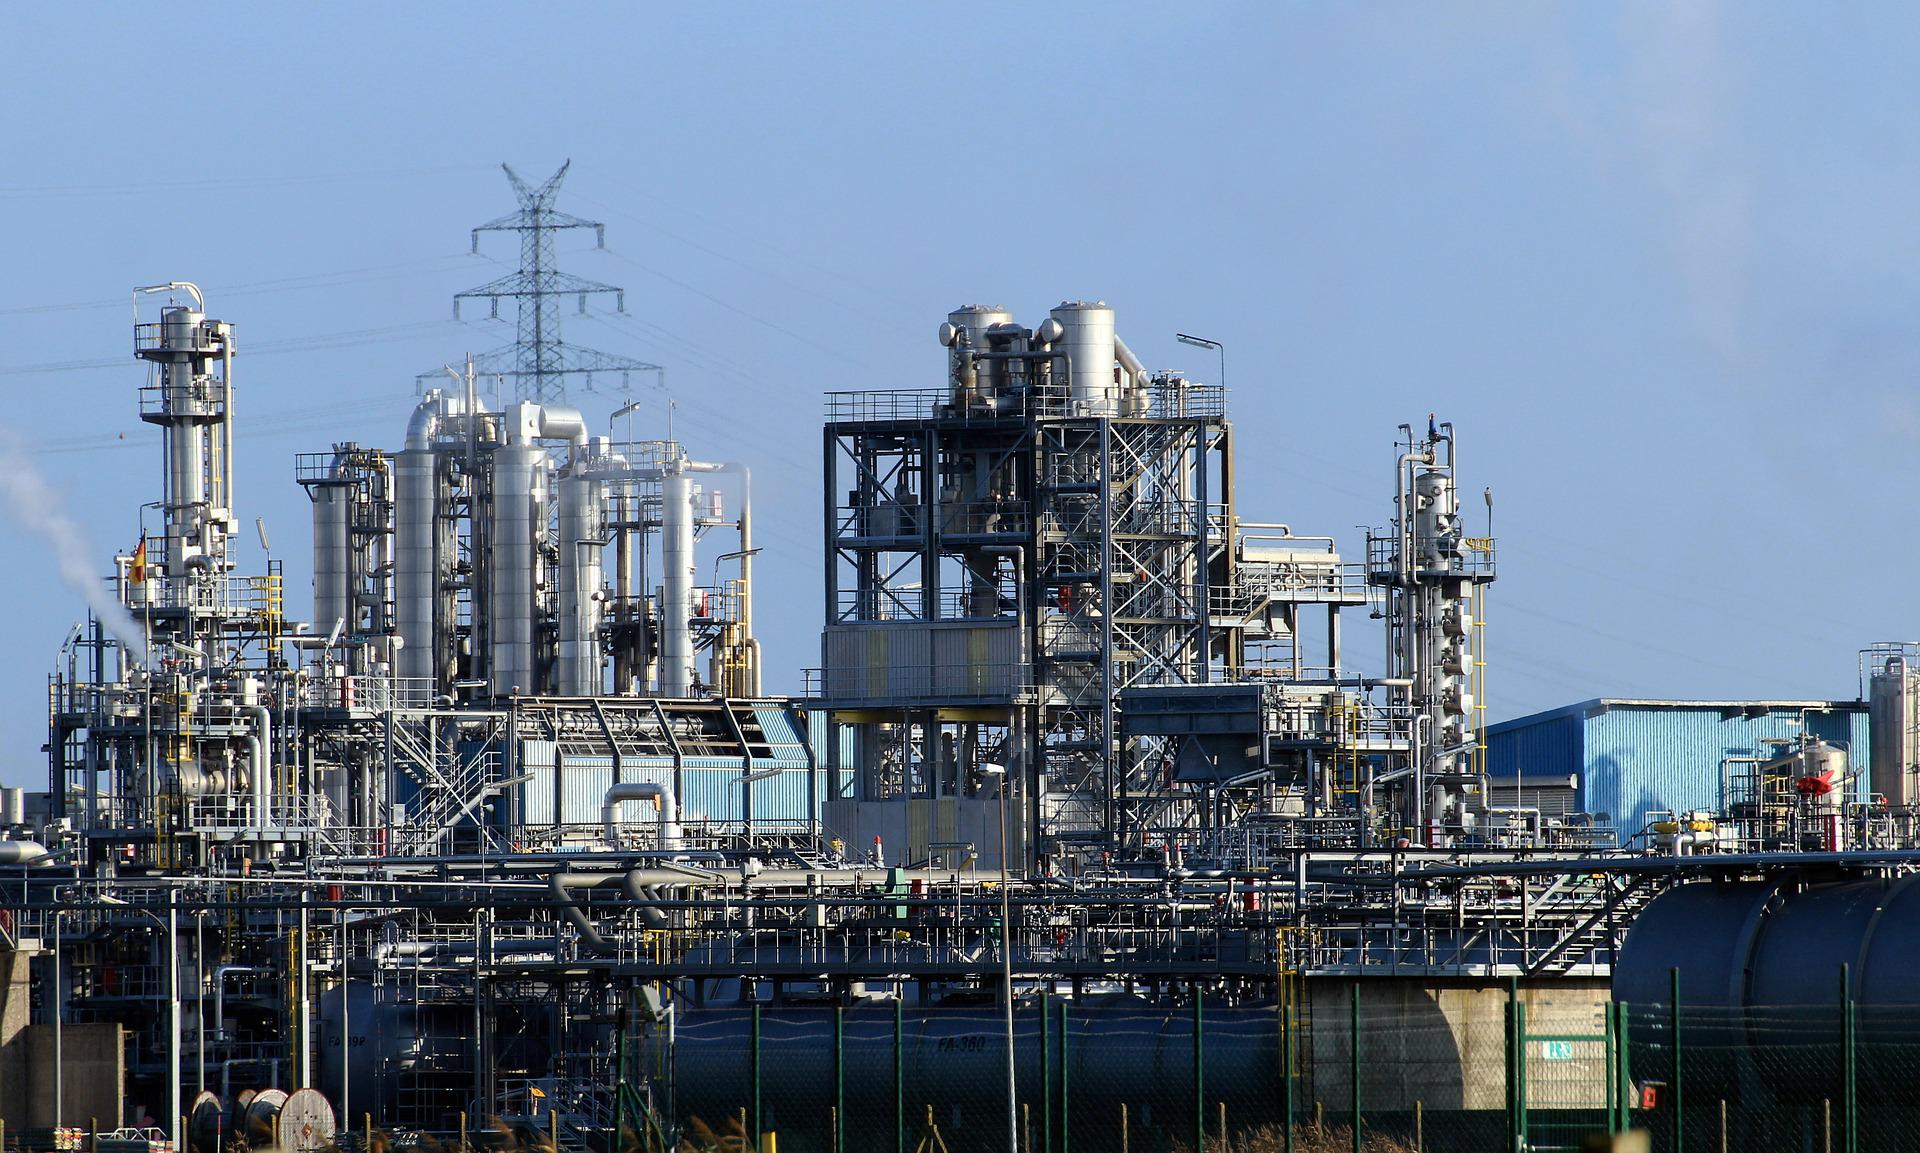 Pakistan Refinery awards $1.2bn contract to Wood for refinery expansion